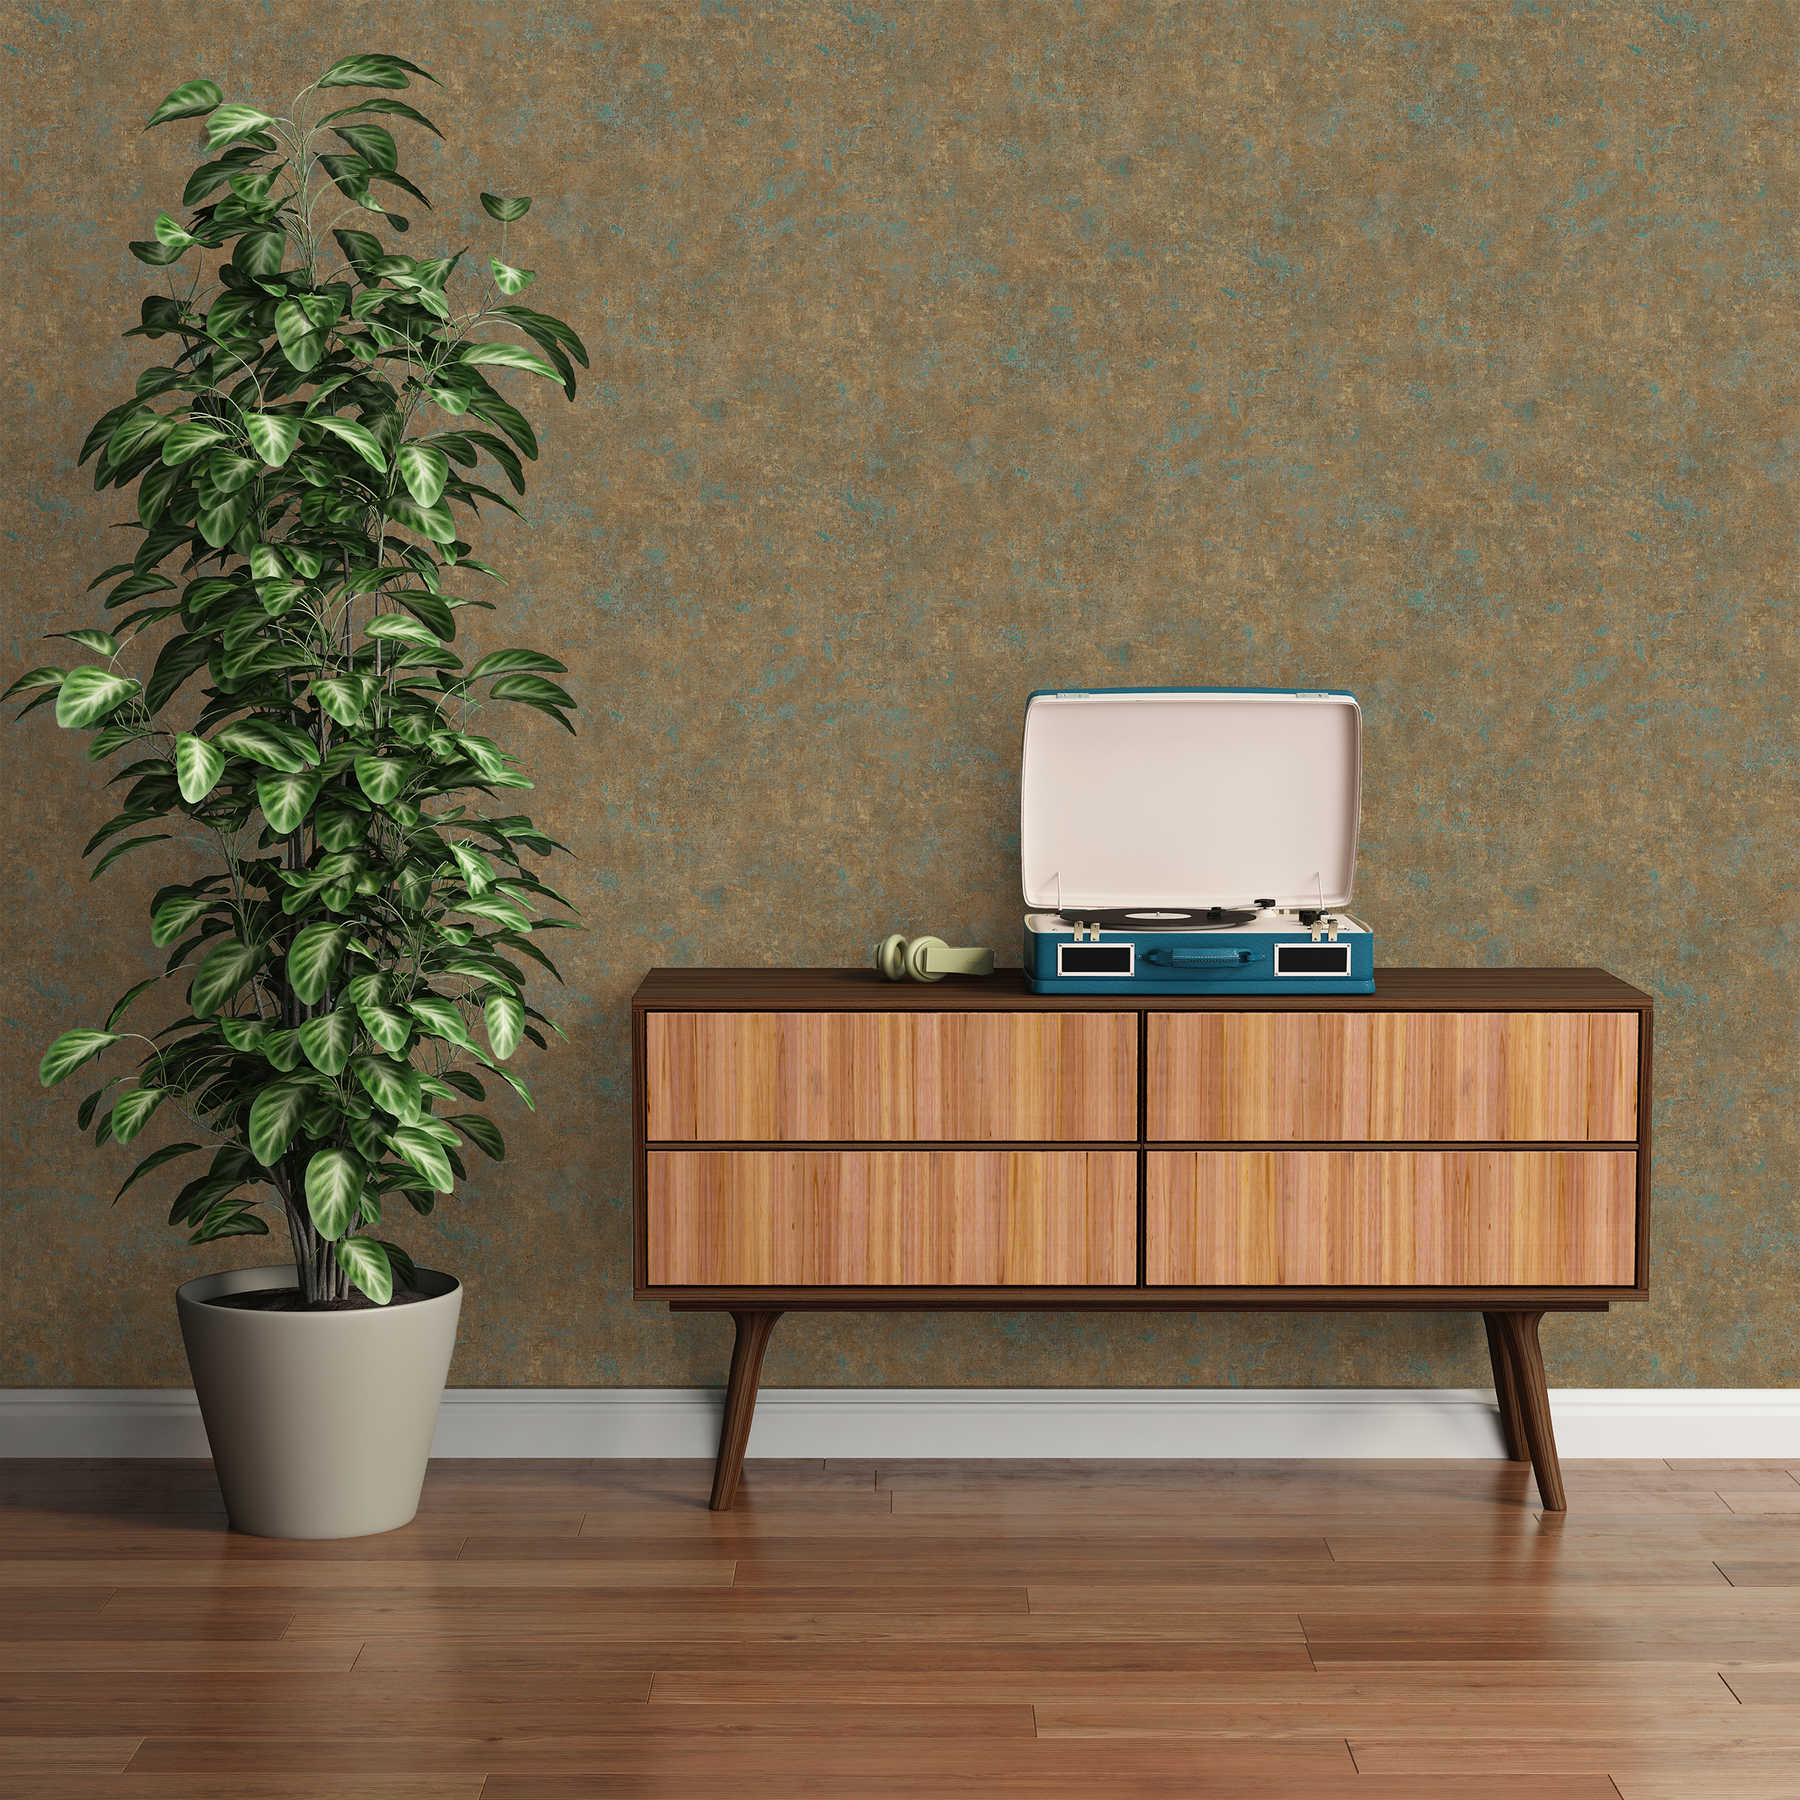             Plain wallpaper with colour pattern in used look - bronze, petrol, brown
        